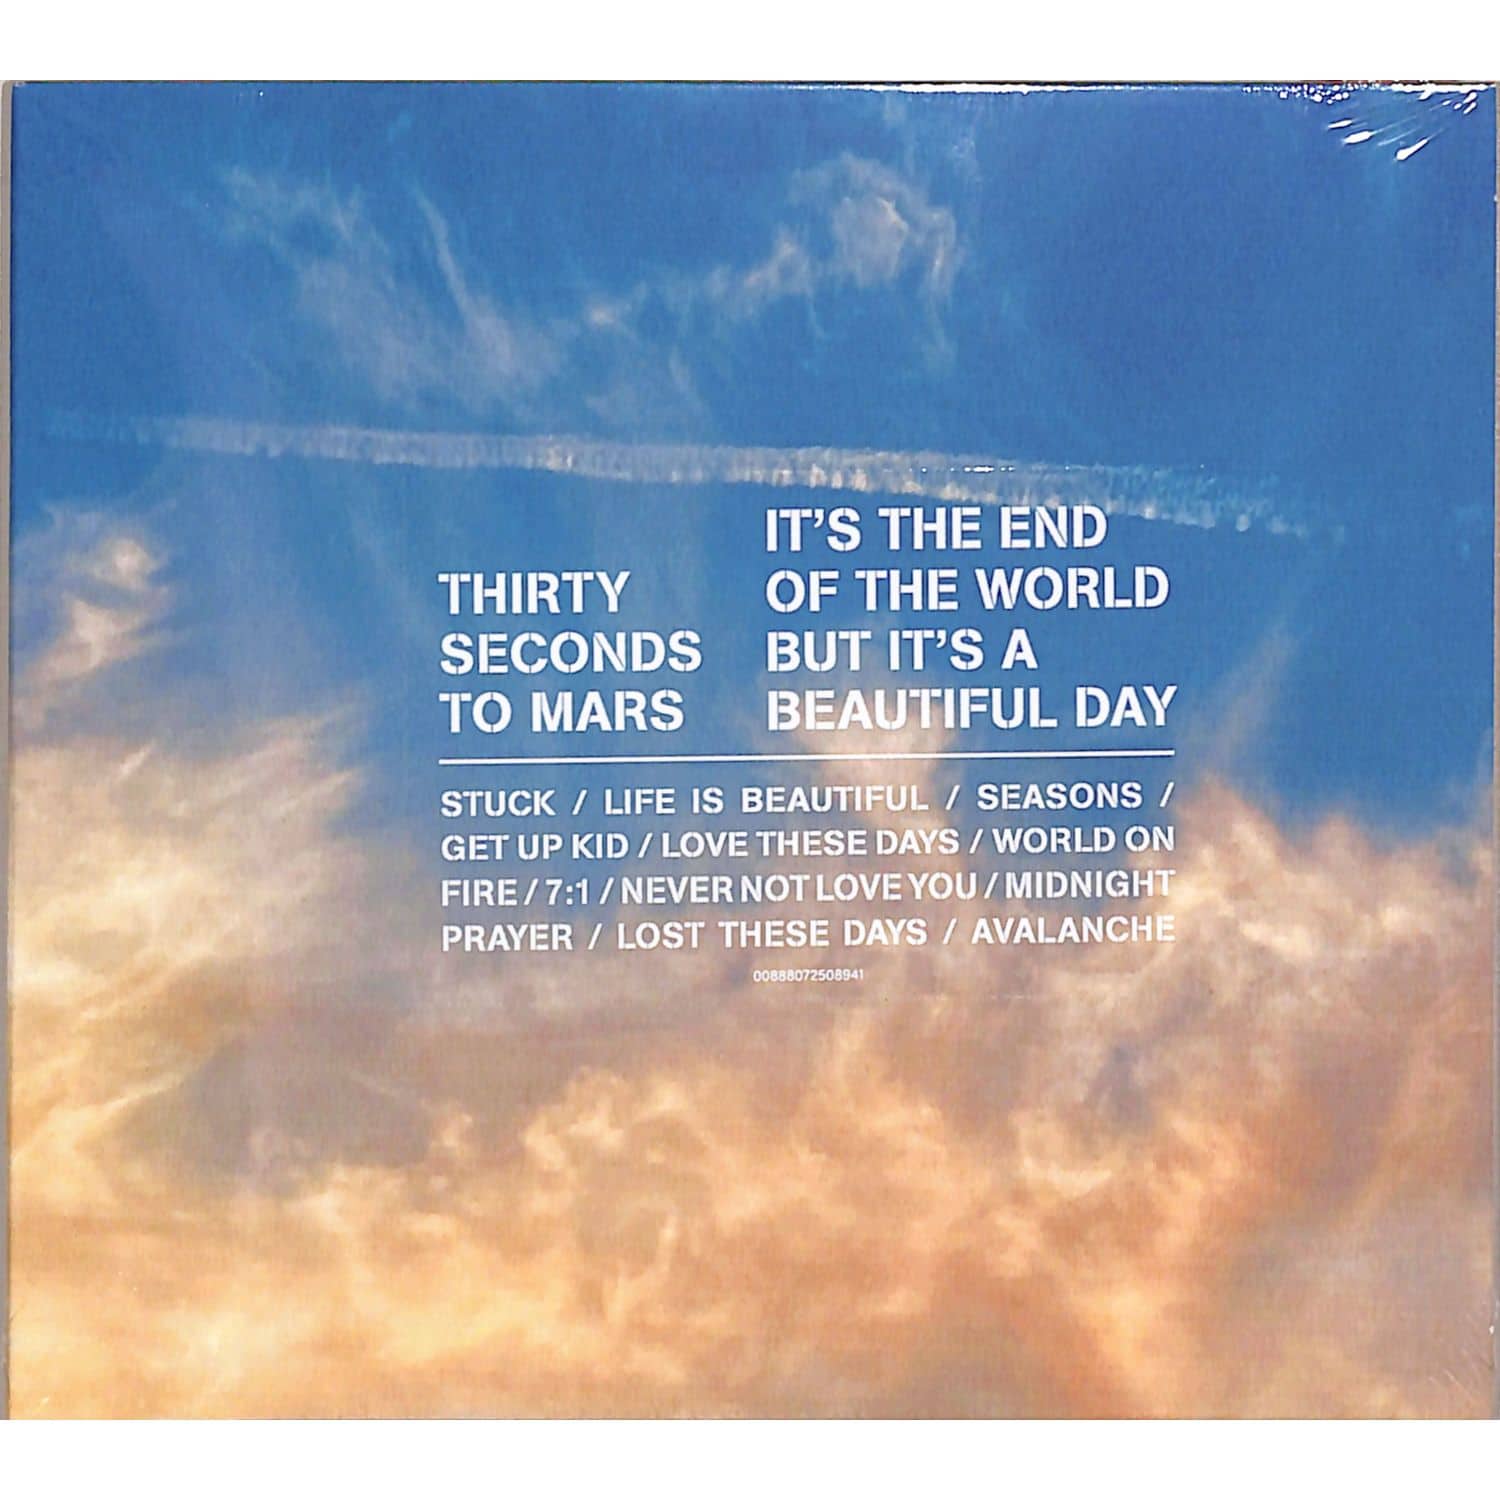 Thirty Seconds To Mars - IT S THE END OF THE WORLD BUT IT S A BEAUTIFUL DAY 